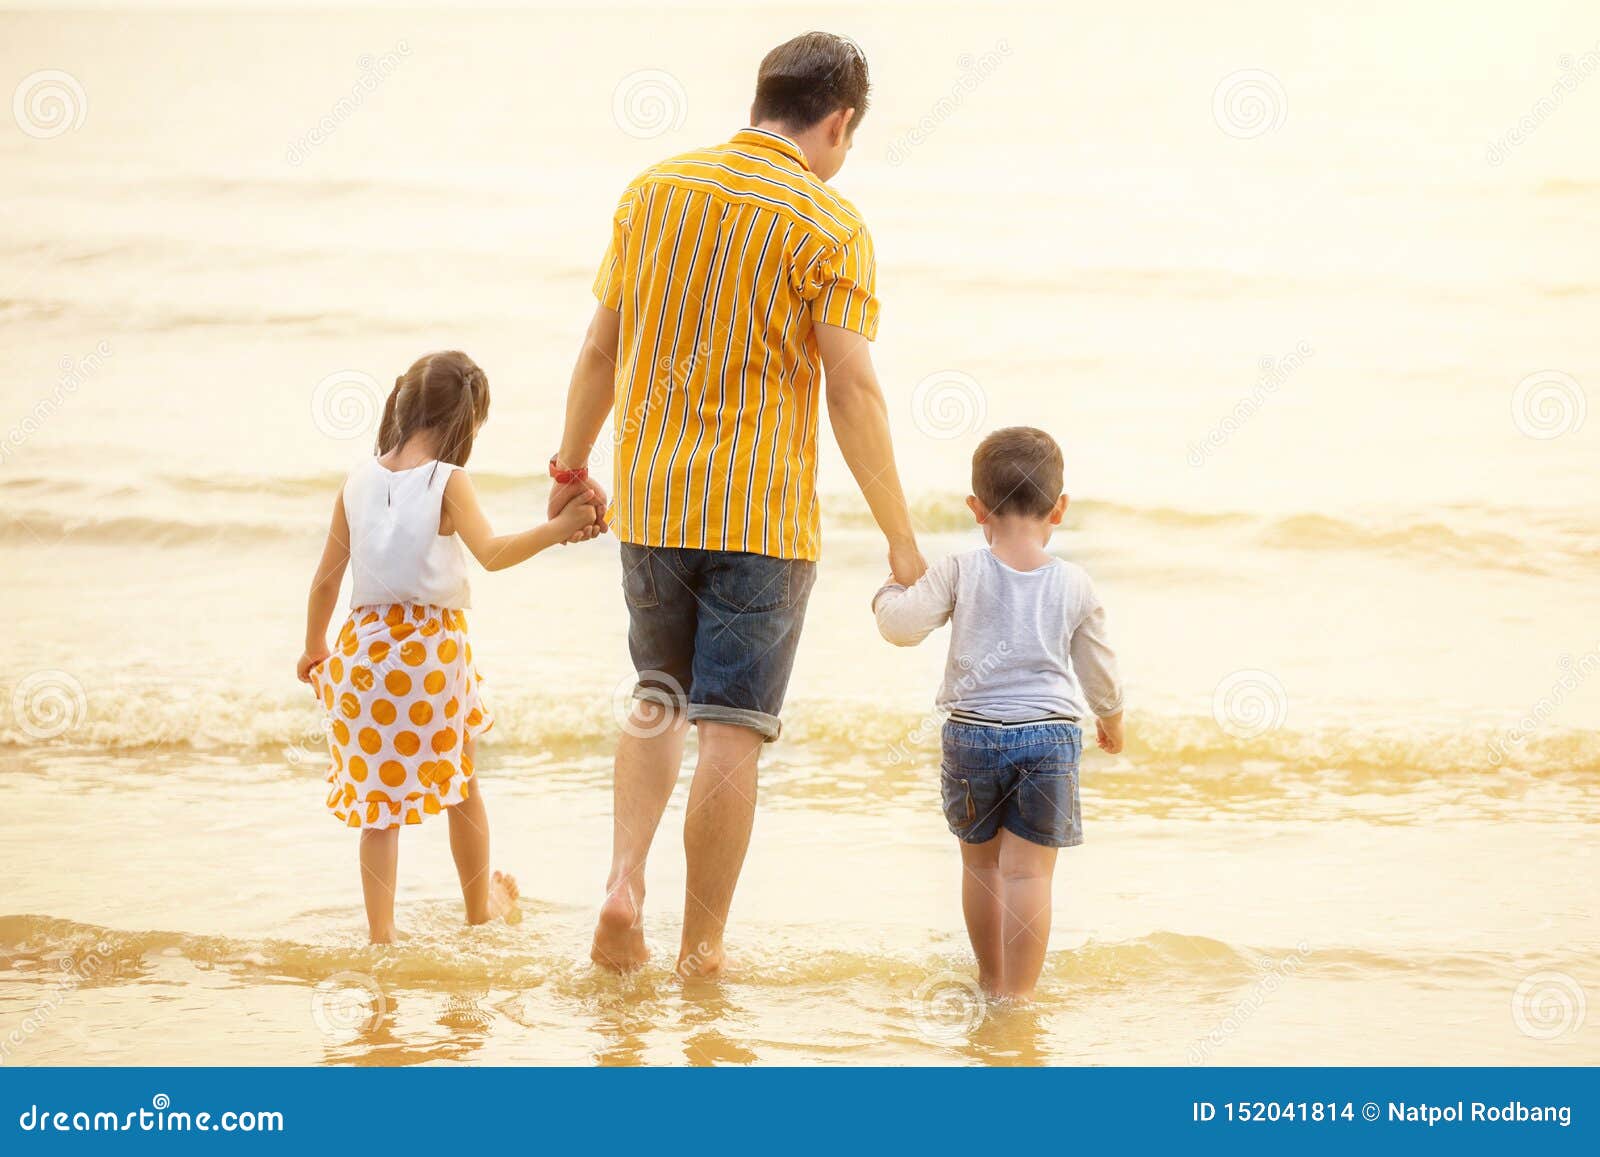 father and children  walking into the  beach holiday .  two kids one dad . rear back view